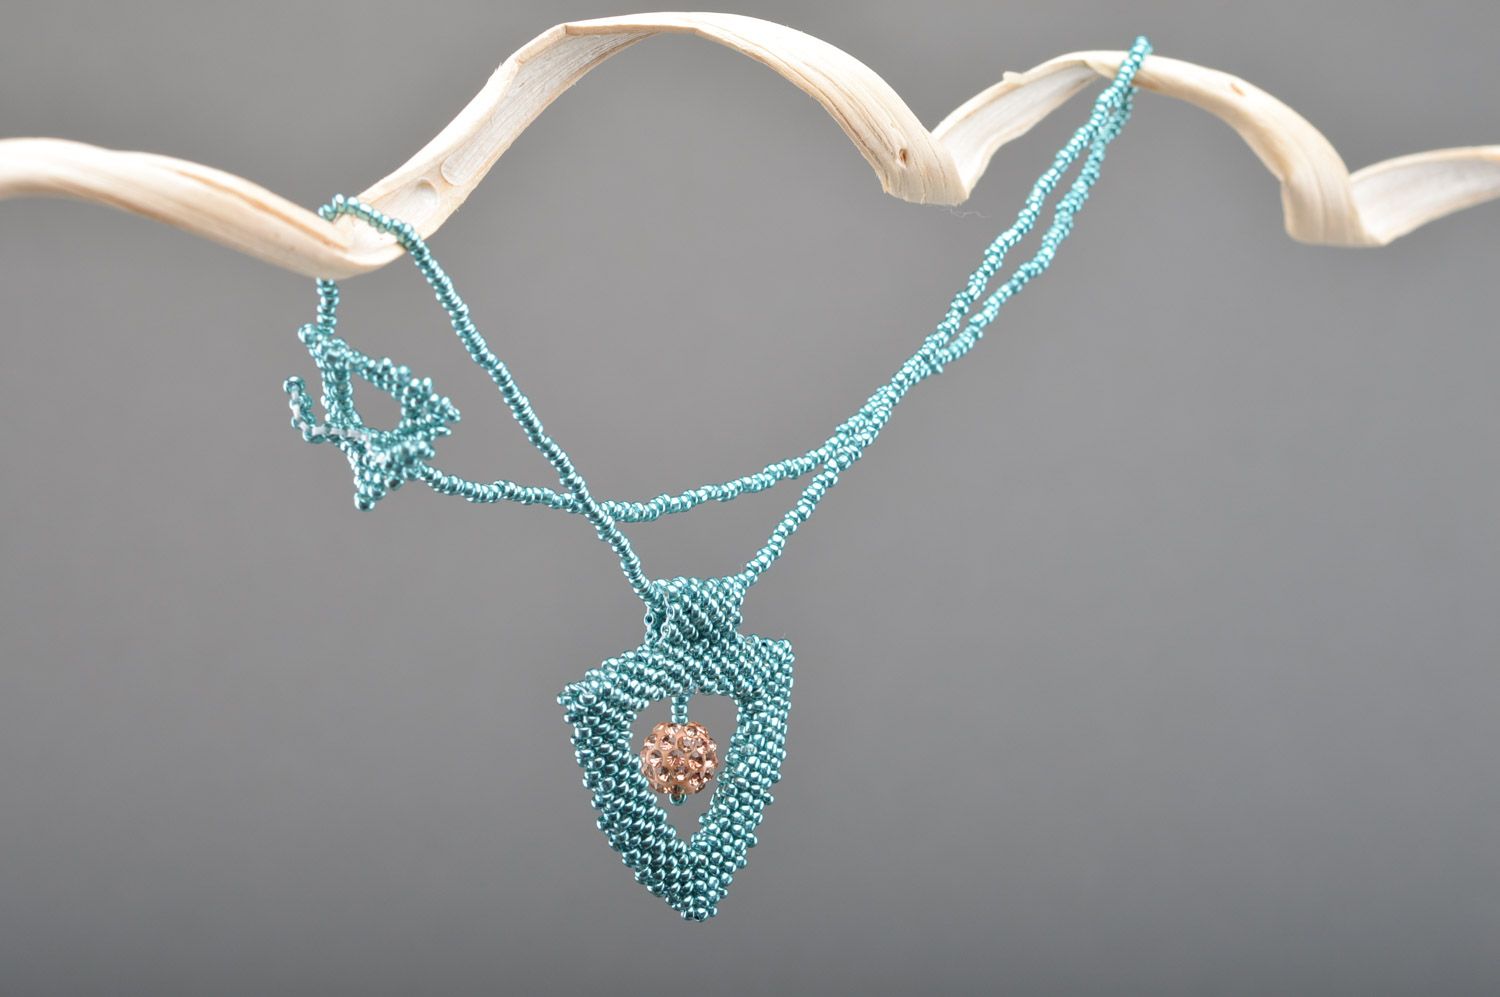 Handmade light blue triangle neck pendant woven of beads on cord with toggle lock photo 1